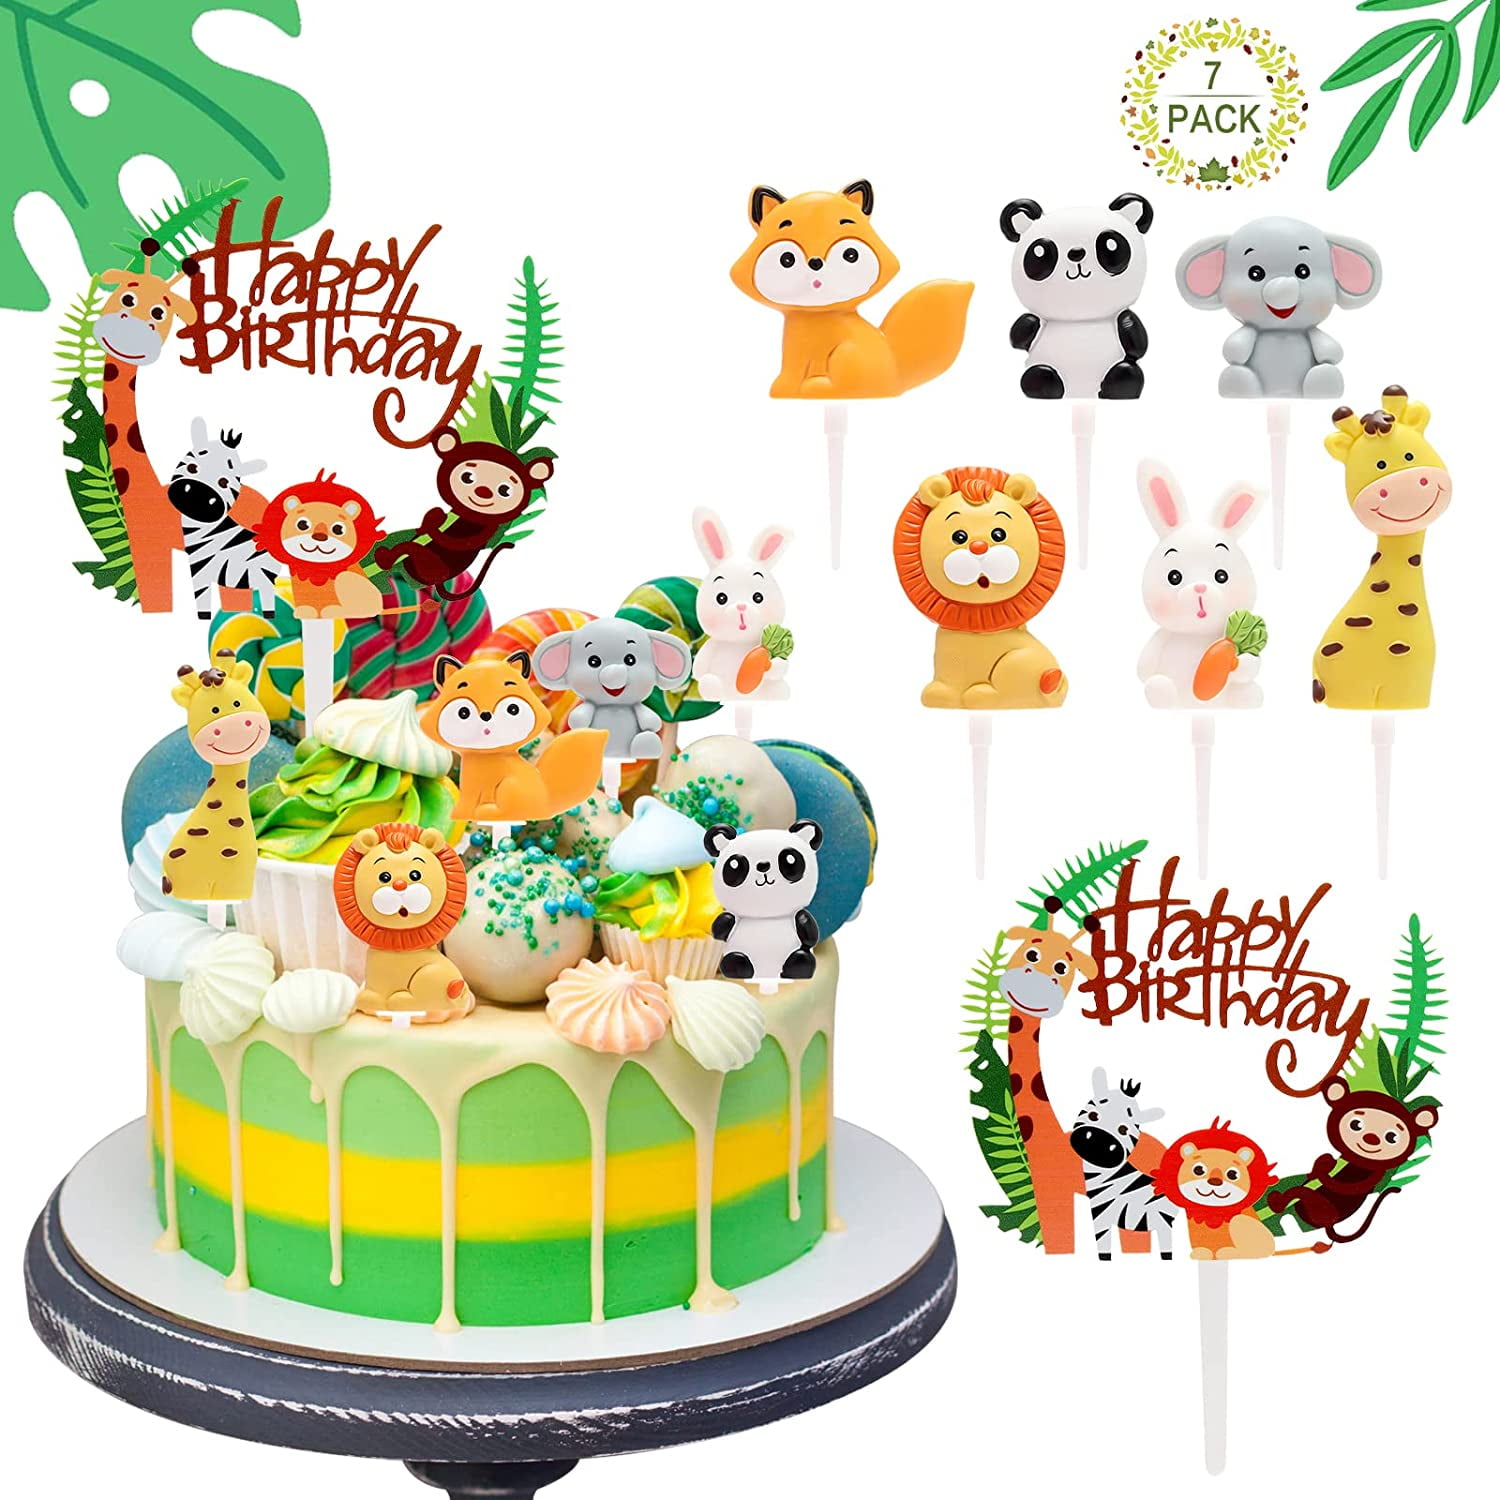 1 St Birthday Cake For Baby Boy, Weight: 4 kg, Packaging Type: Box